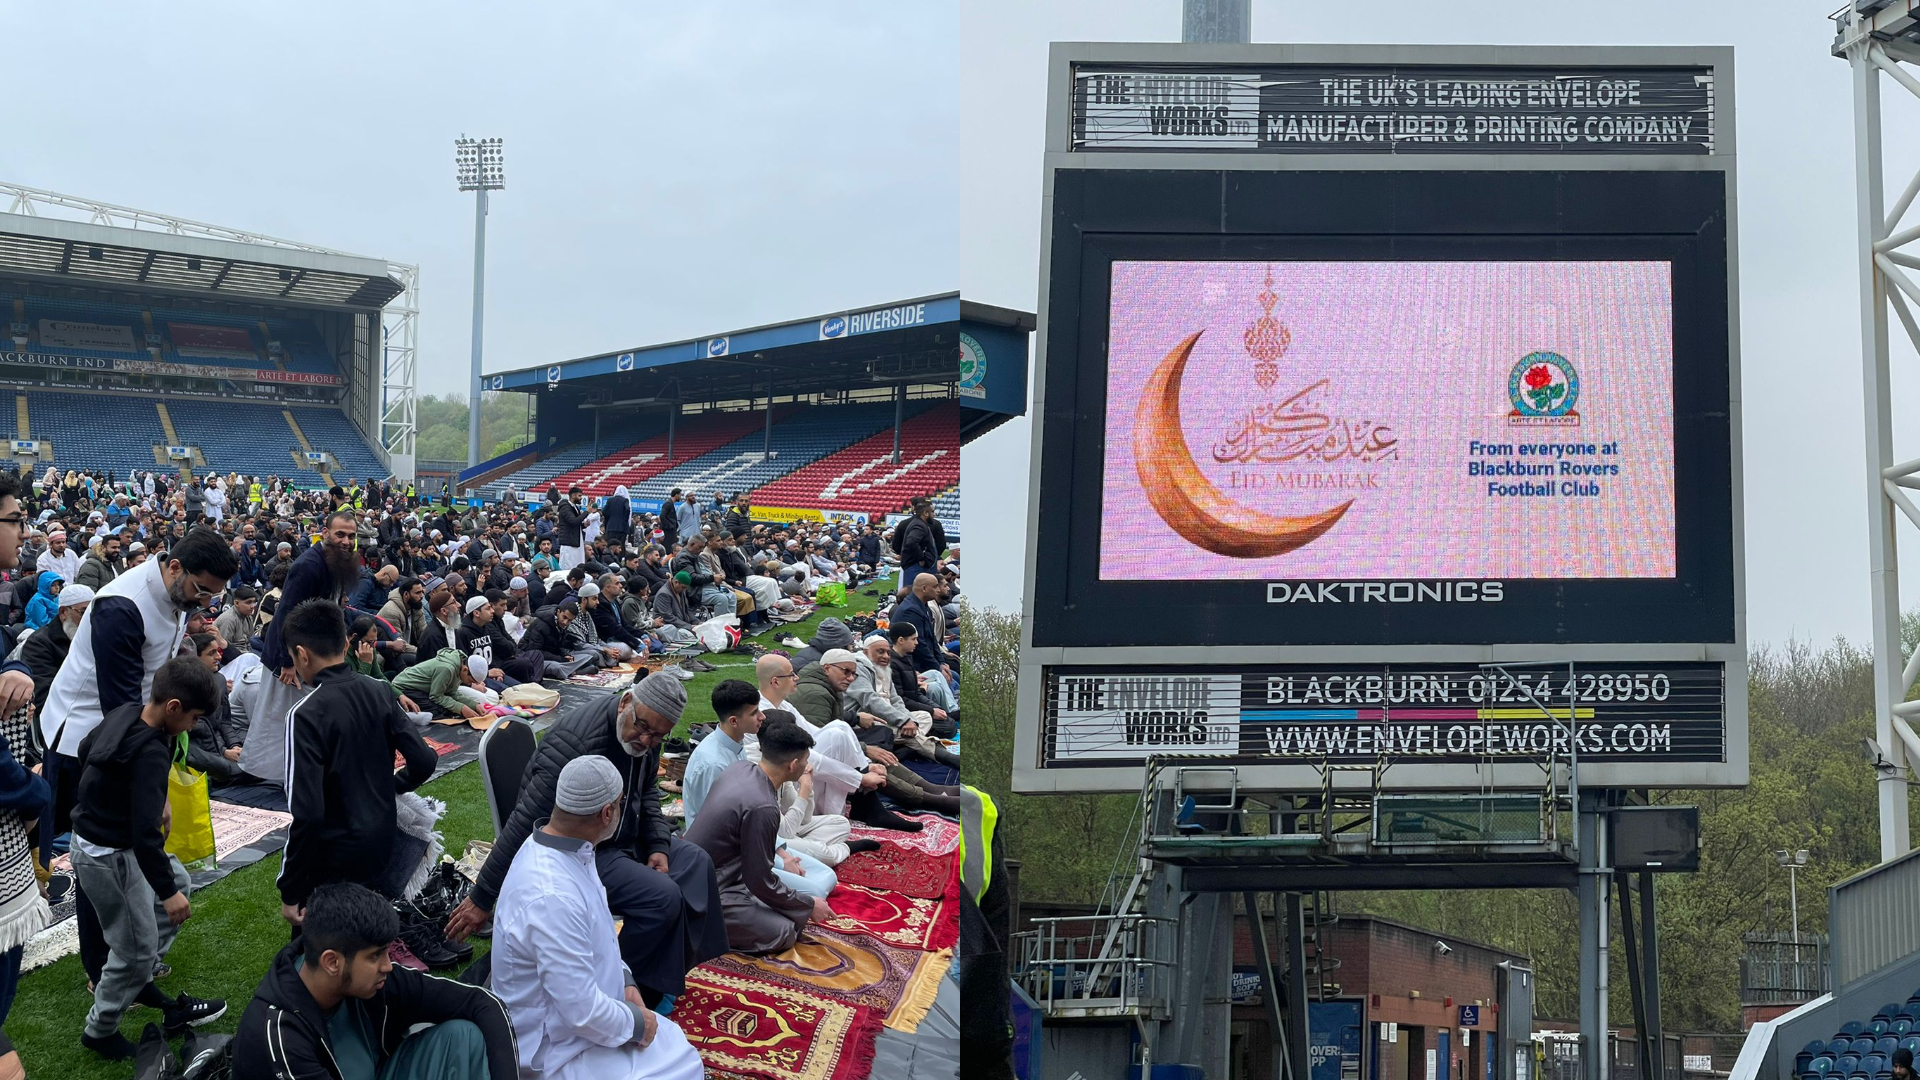 Ahmed Khalifa attended Ewood Park for Eid prayers on Monday 2nd May